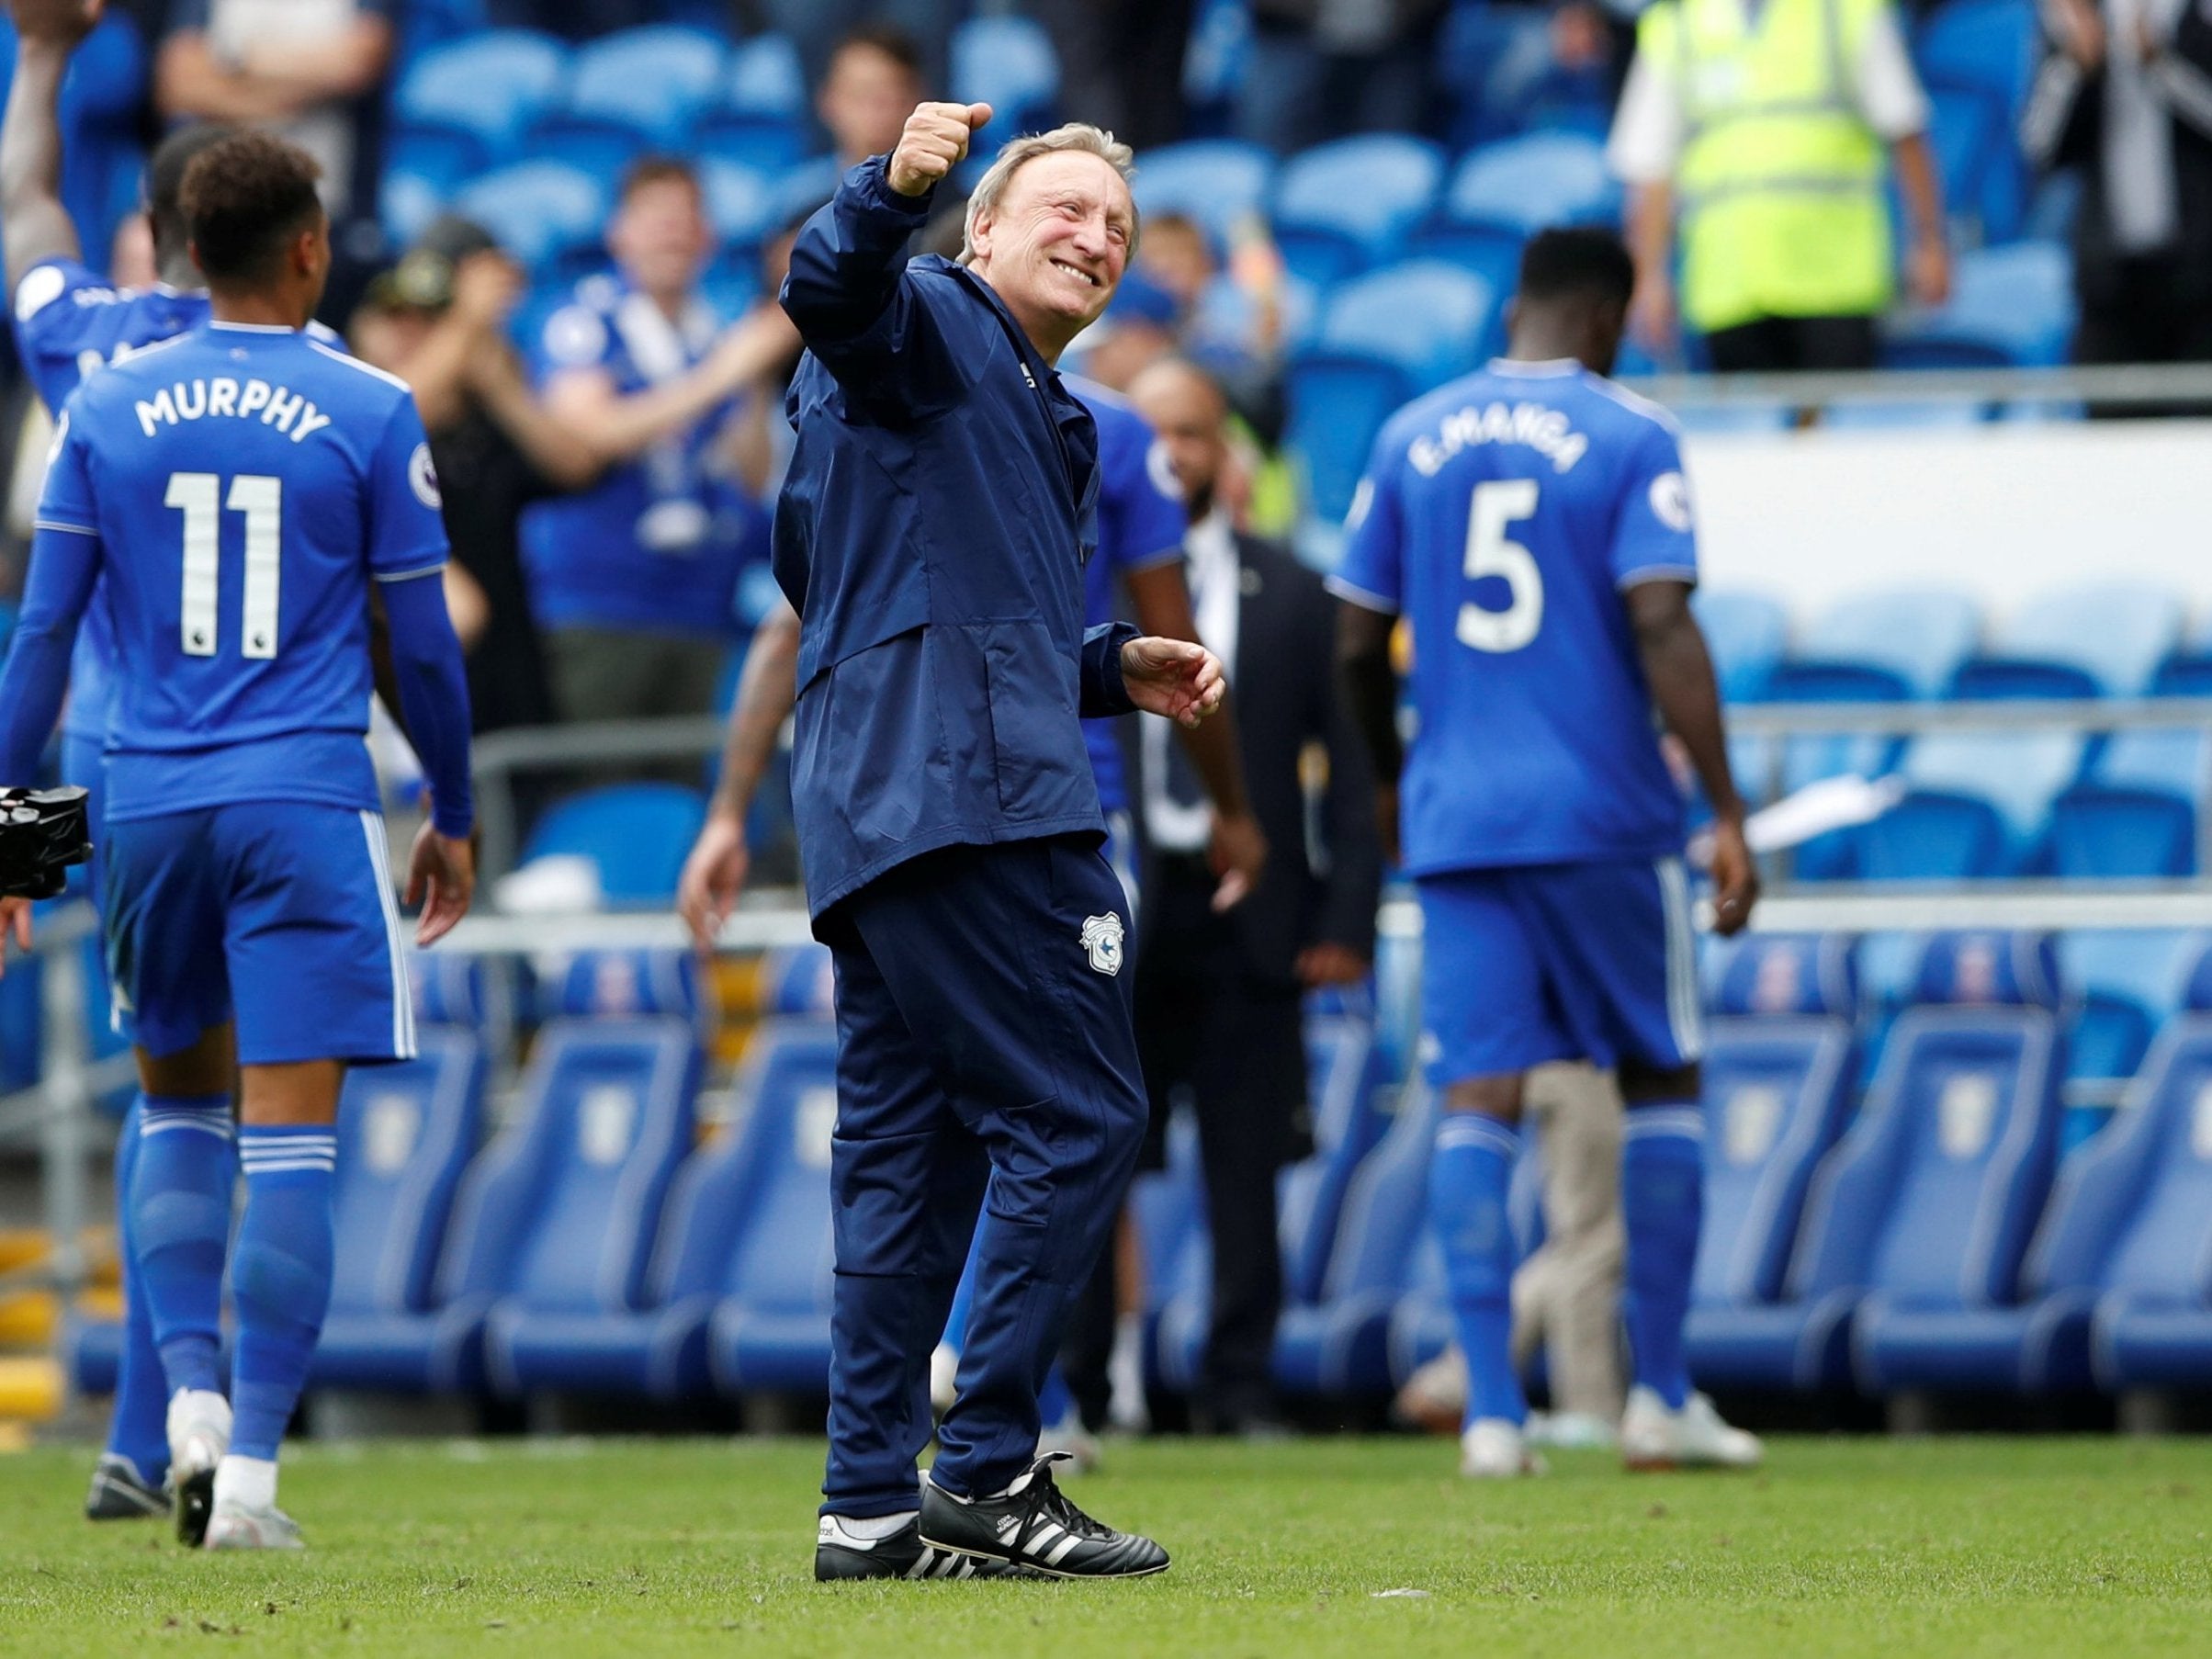 Neil Warnock has led Cardiff up from the Championship